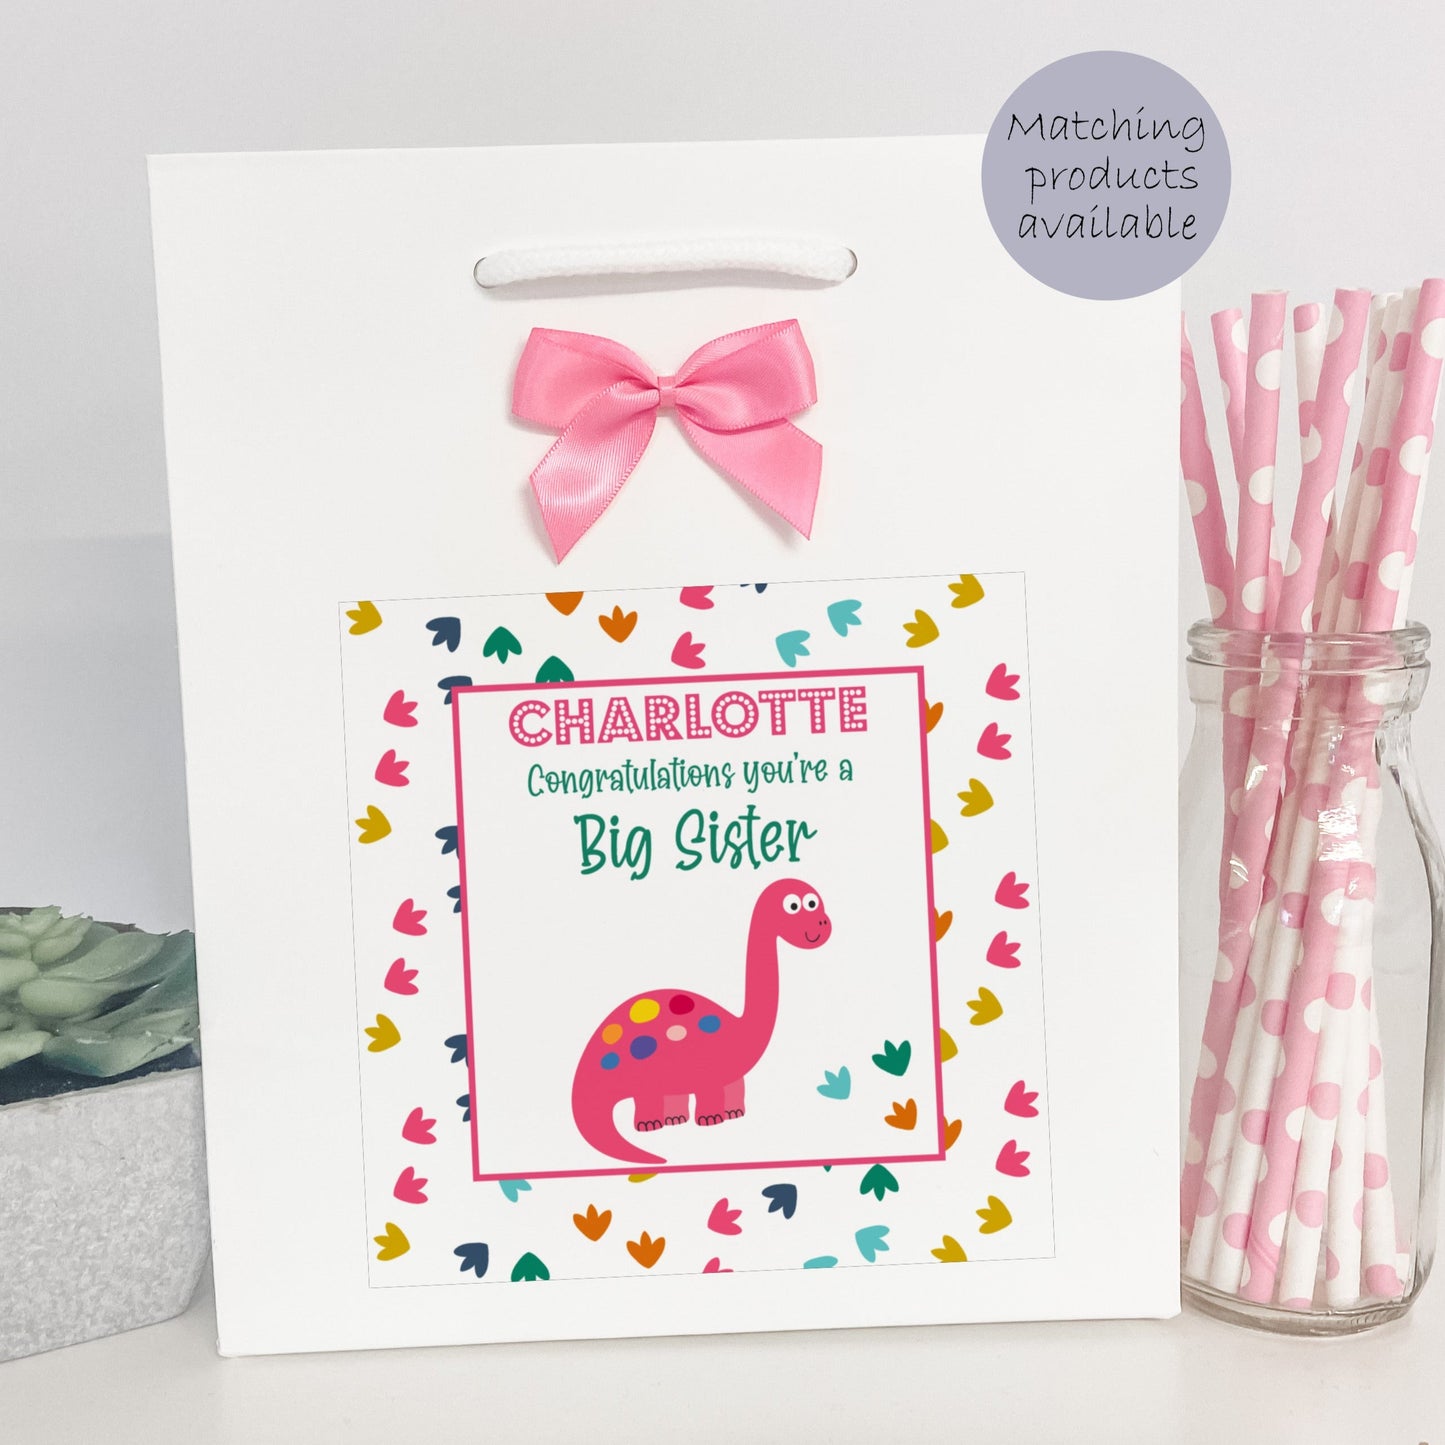 Personalised Congratulations New Big Brother Card Dinosaur